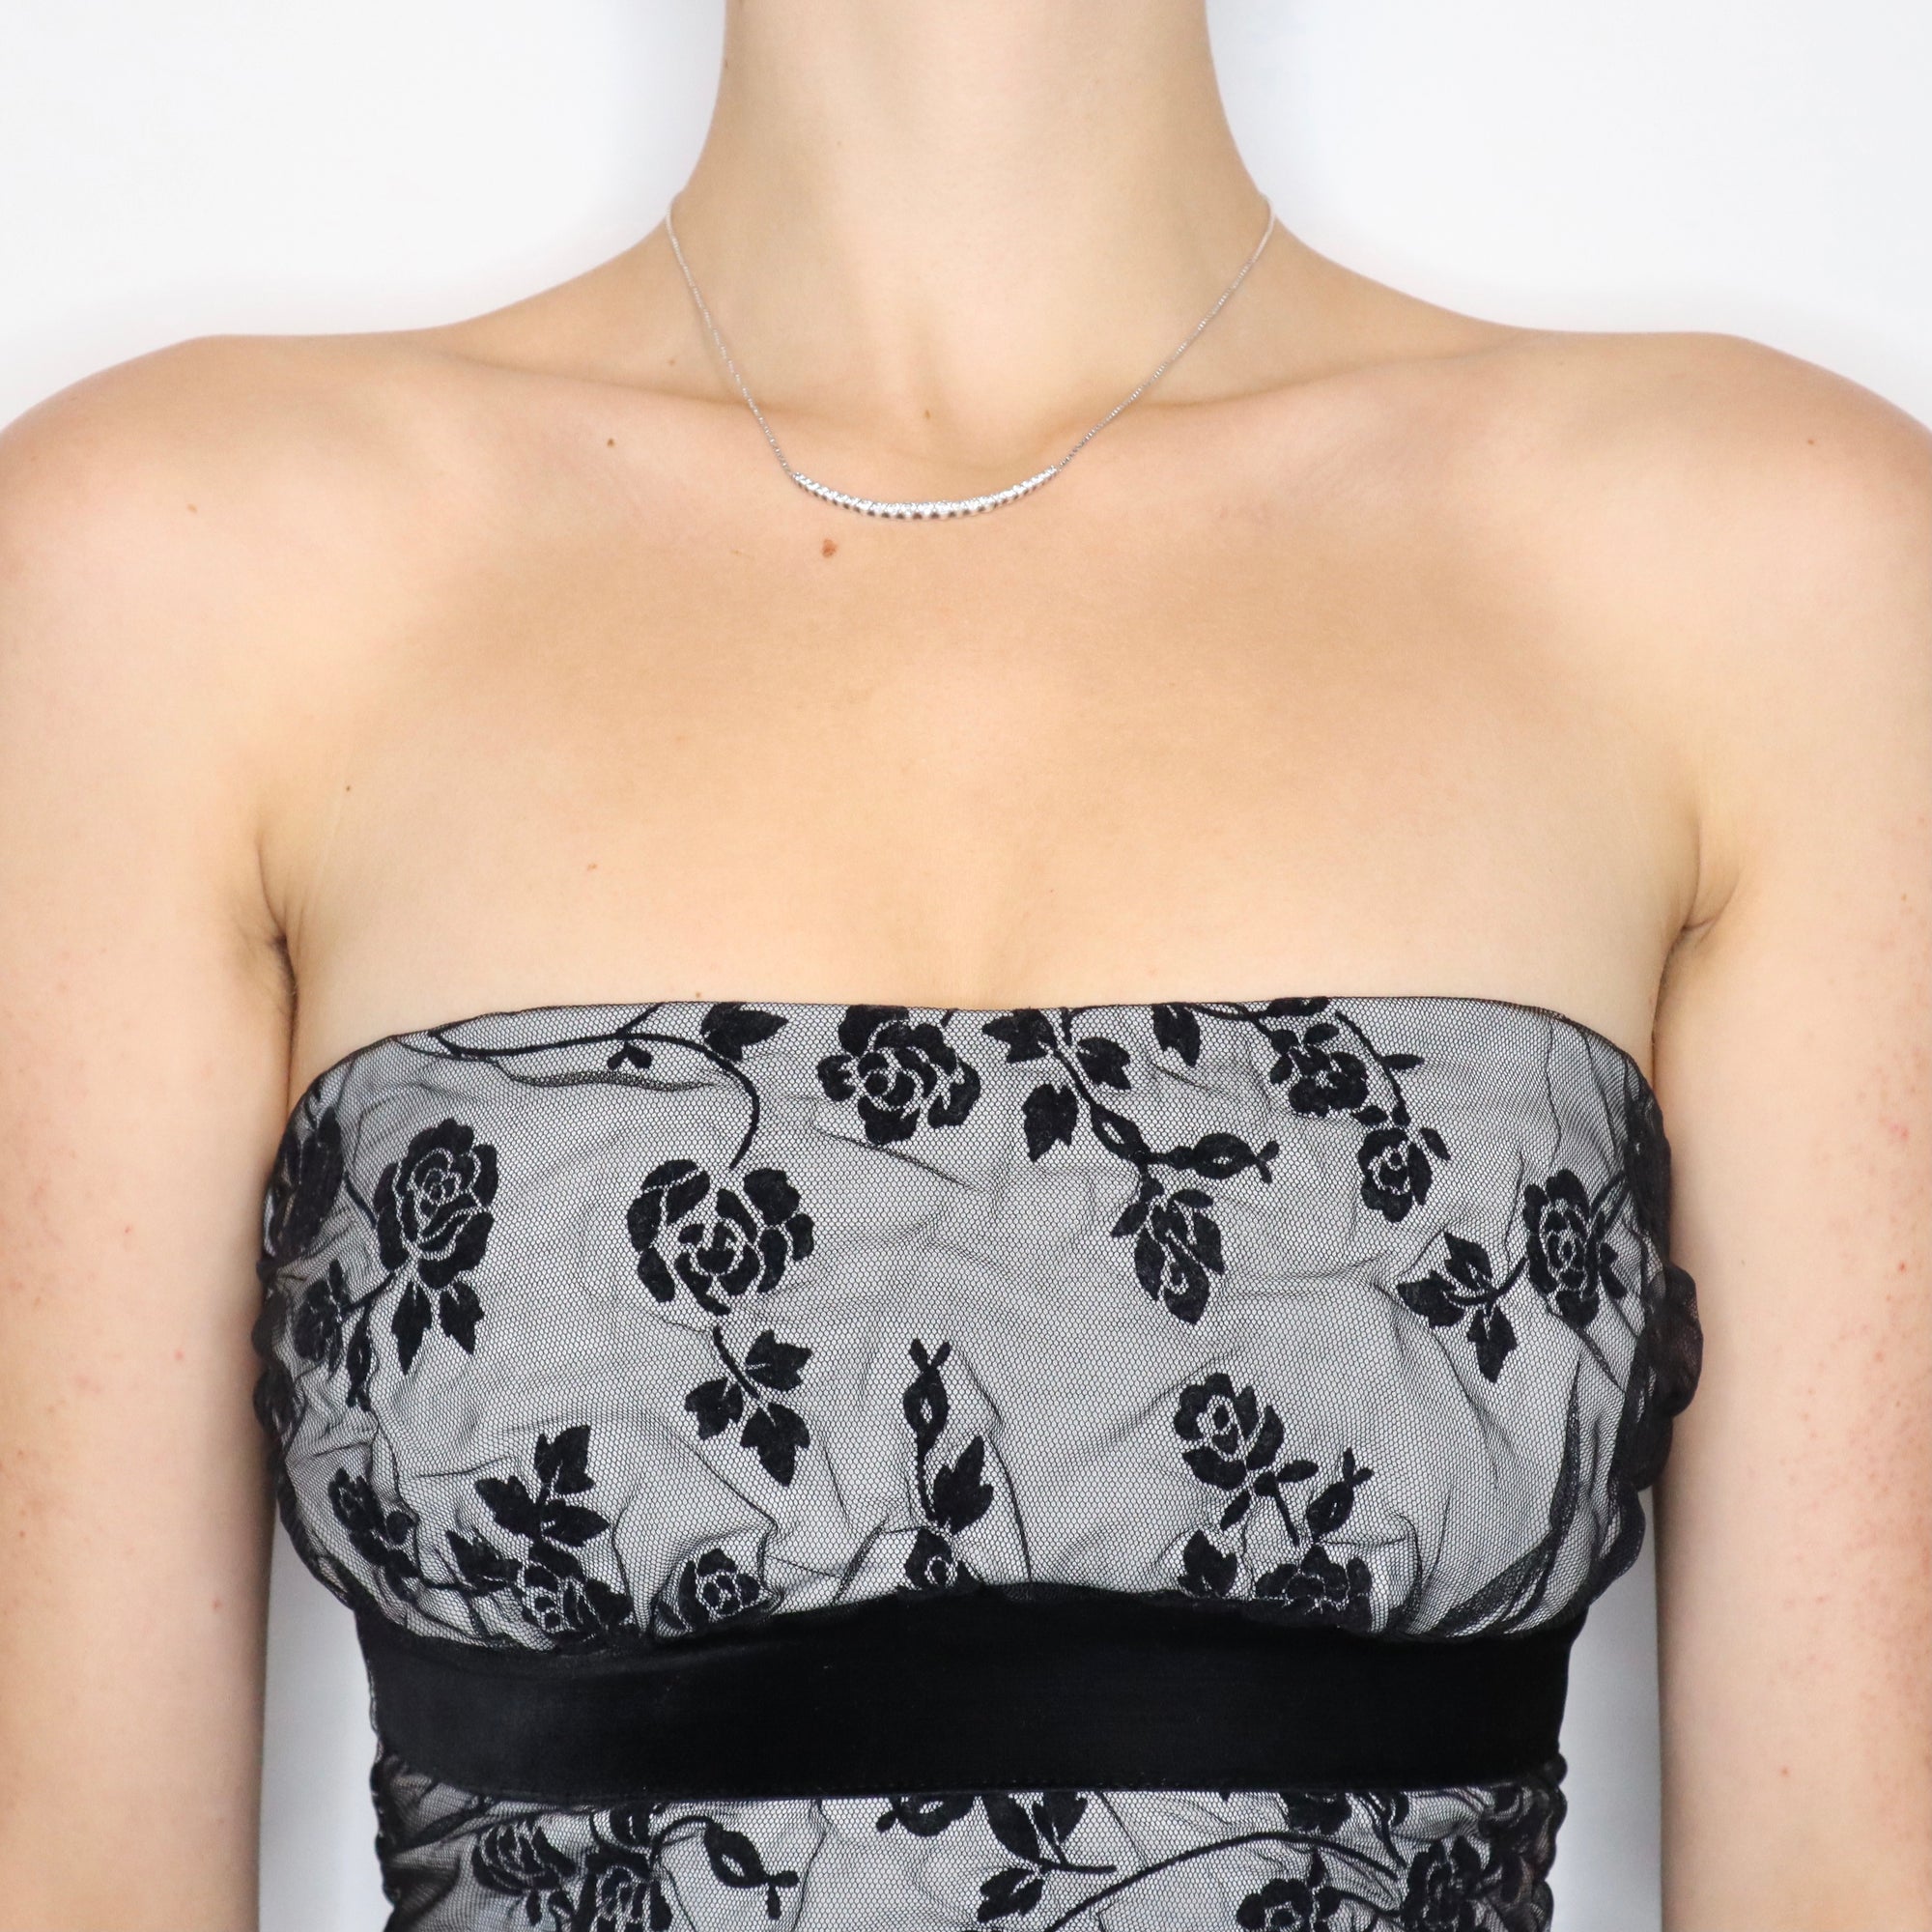 Vintage Early 2000s Black Rose Strapless Top